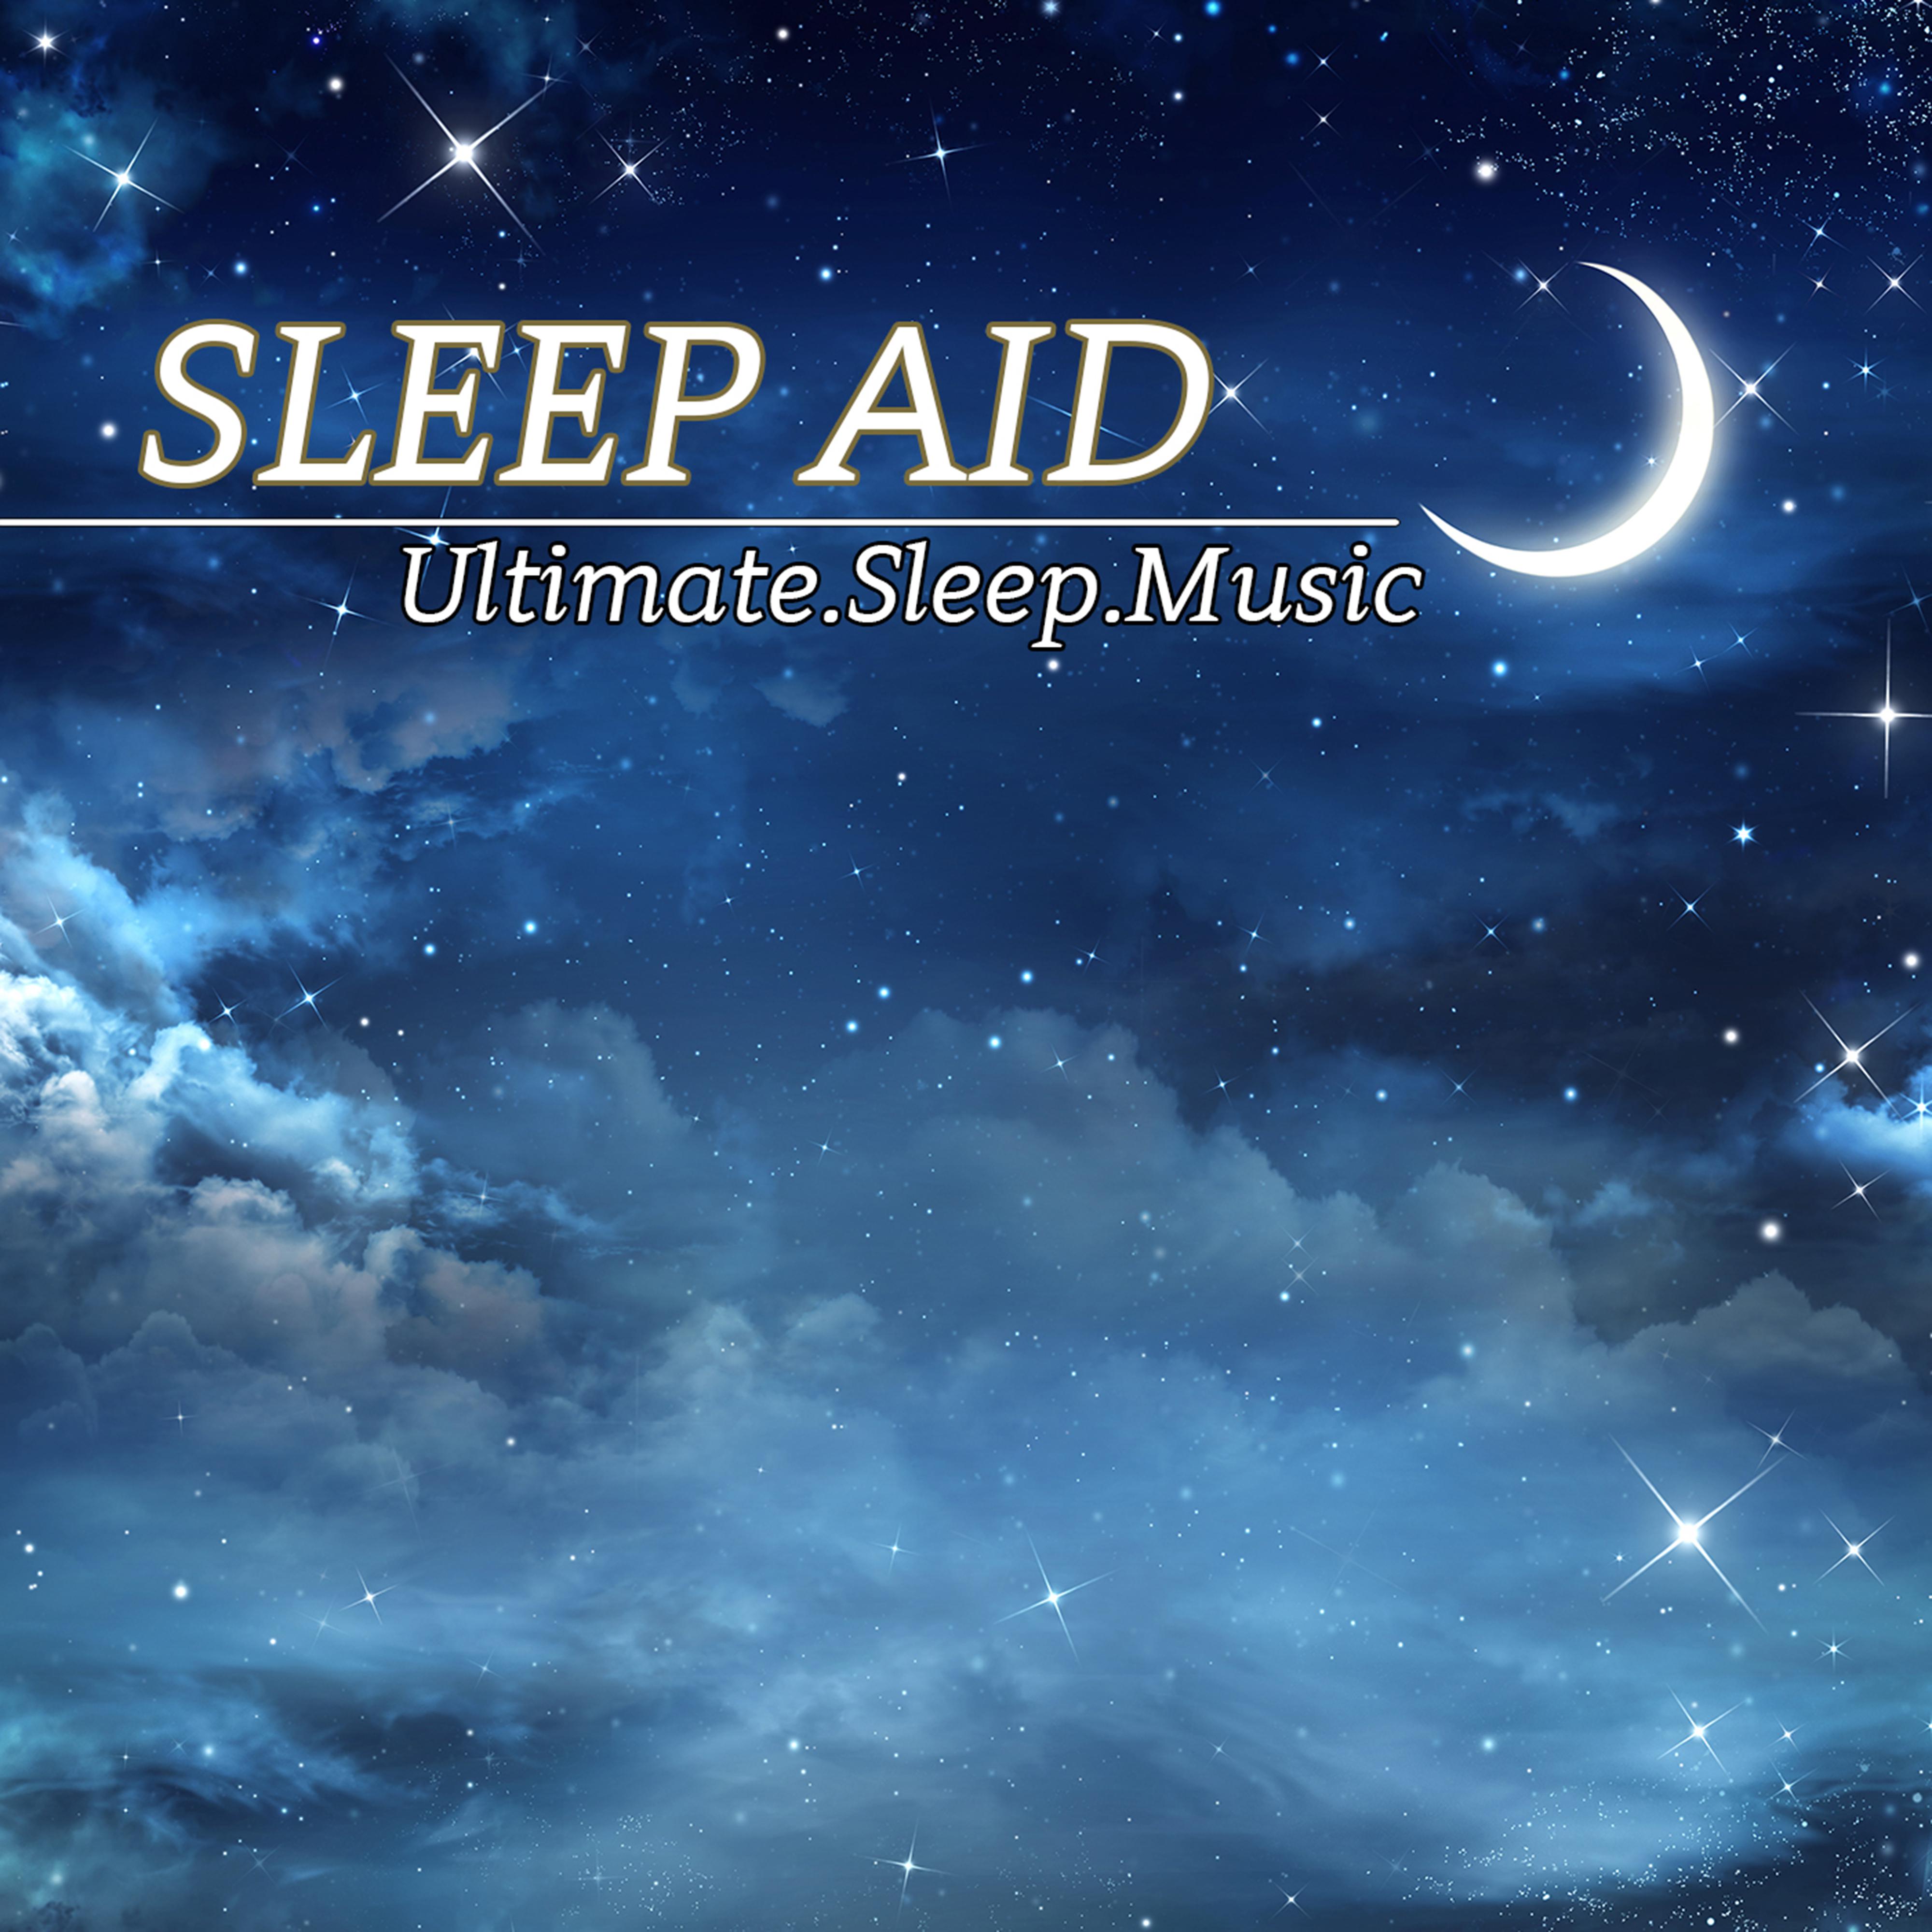 Sleep Aid - Ultimate Sleep Music Relaxation, Sleep Easy With Dr. Waheguru Ambient Nature Sounds, Lullaby Music Interludes & Meditation 432hz Music Melody